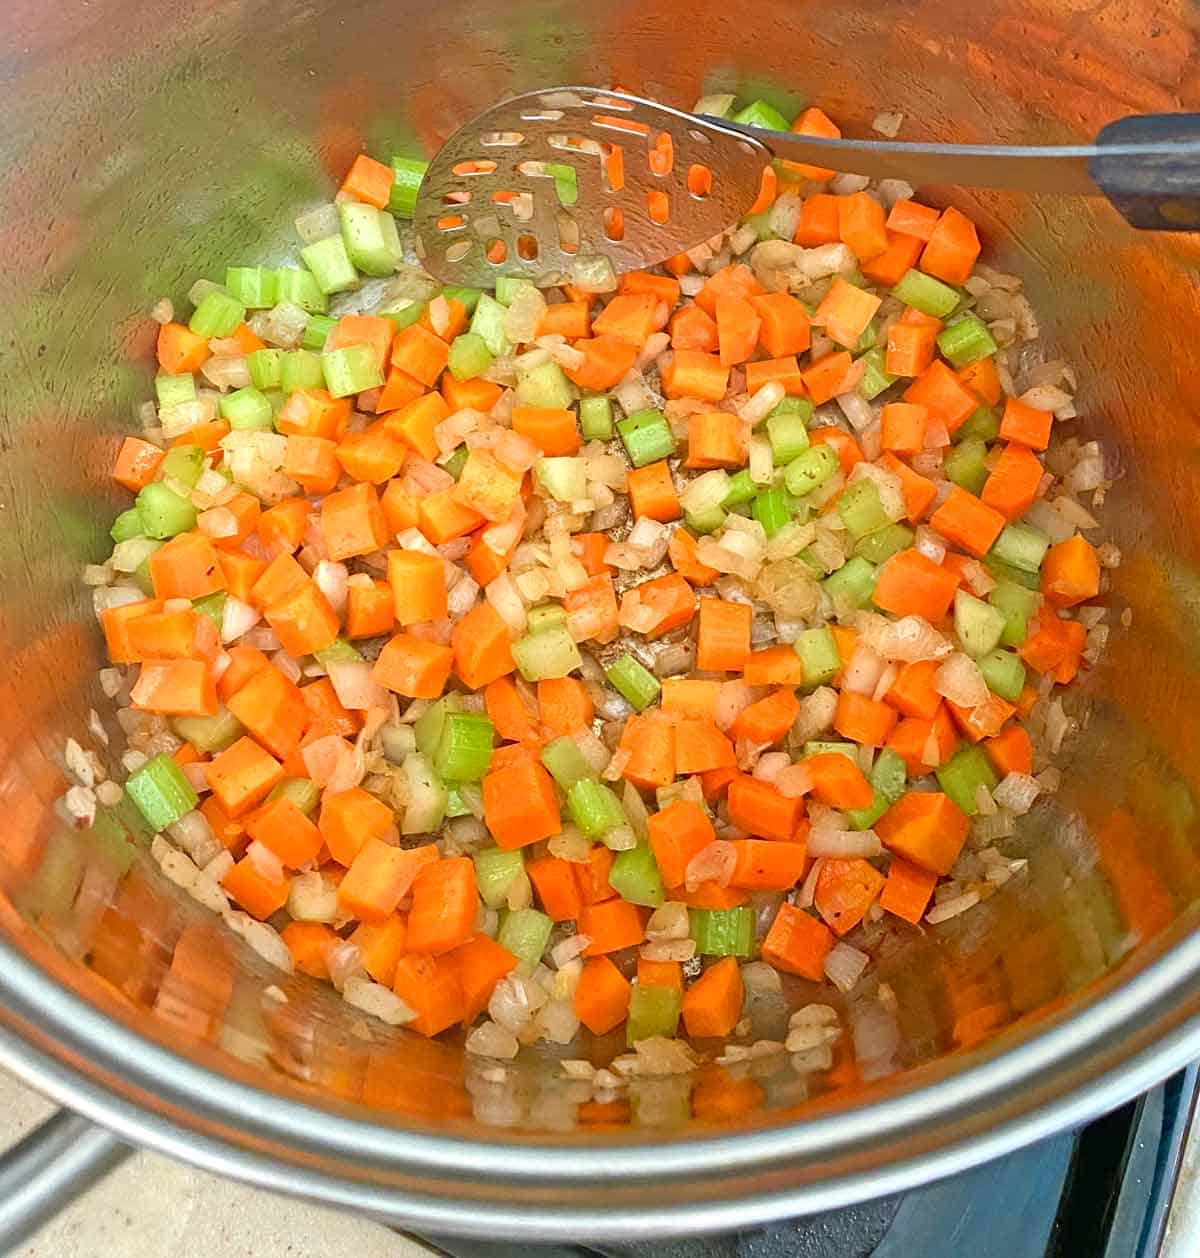 Cooking chopped celery, carrots and onion in a large soup pot.